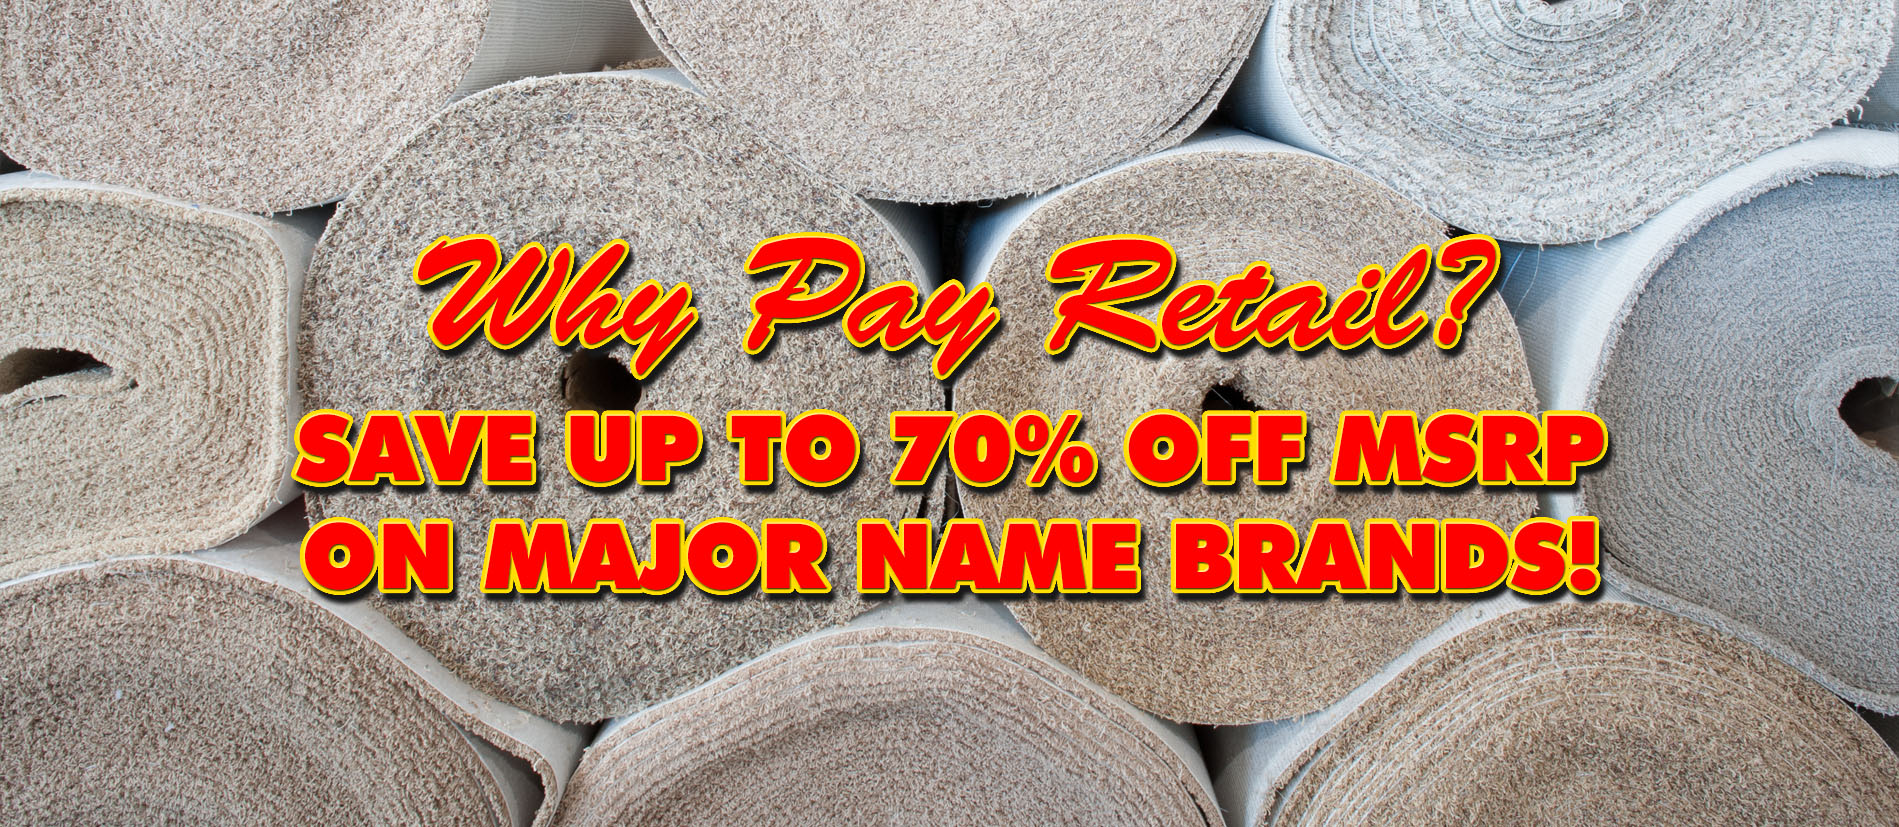 Why Pay Retail? Save Up To 70% Off MSRP On Major Name Brands!